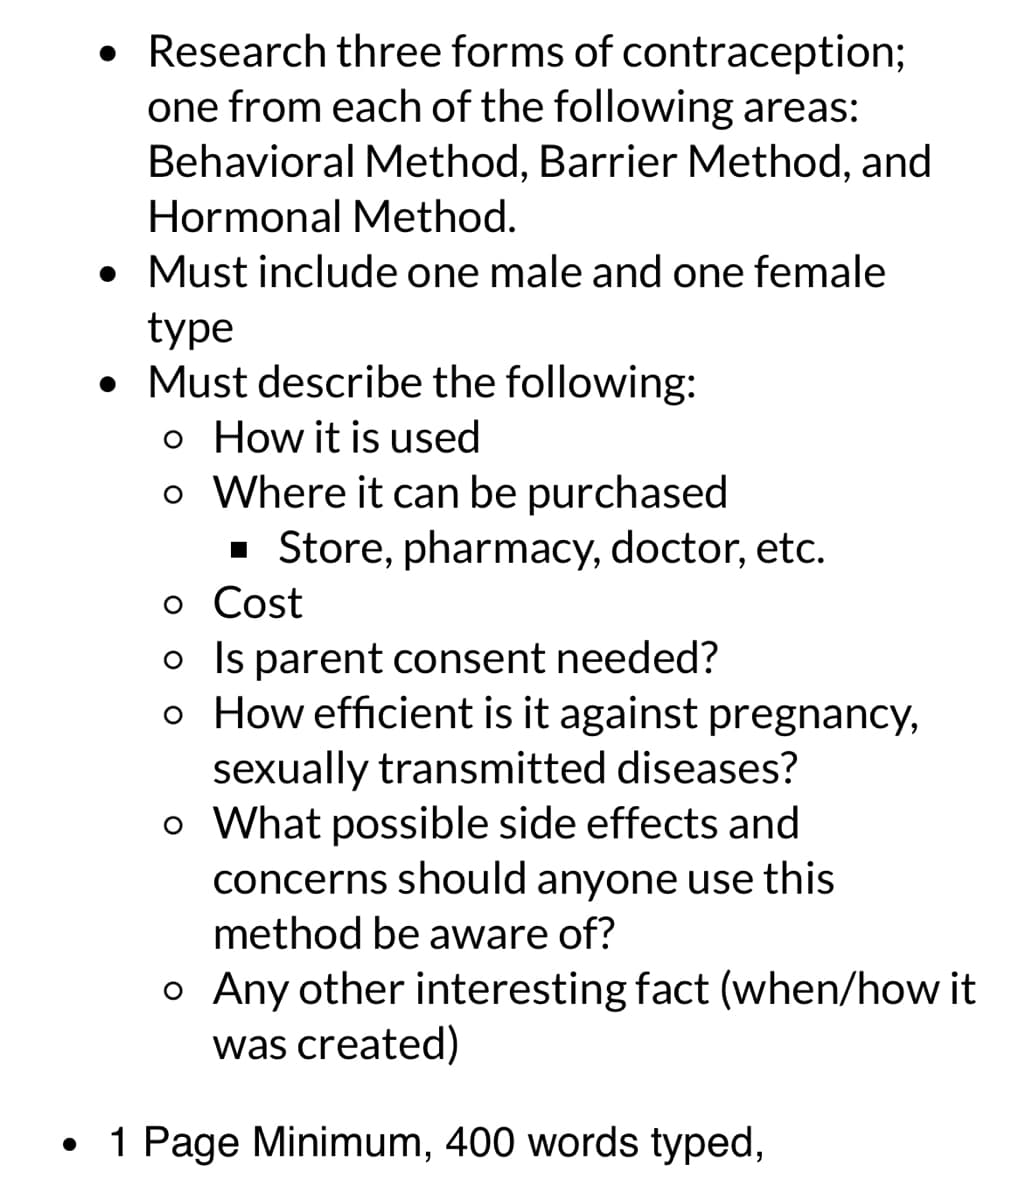 • Research three forms of contraception;
one from each of the following areas:
Behavioral Method, Barrier Method, and
Hormonal Method.
• Must include one male and one female
type
• Must describe the following:
o How it is used
o Where it can be purchased
■ Store, pharmacy, doctor, etc.
。 Cost
o Is parent consent needed?
。 How efficient is it against pregnancy,
sexually transmitted diseases?
。 What possible side effects and
concerns should anyone use this
method be aware of?
。 Any other interesting fact (when/how it
was created)
1 Page Minimum, 400 words typed,